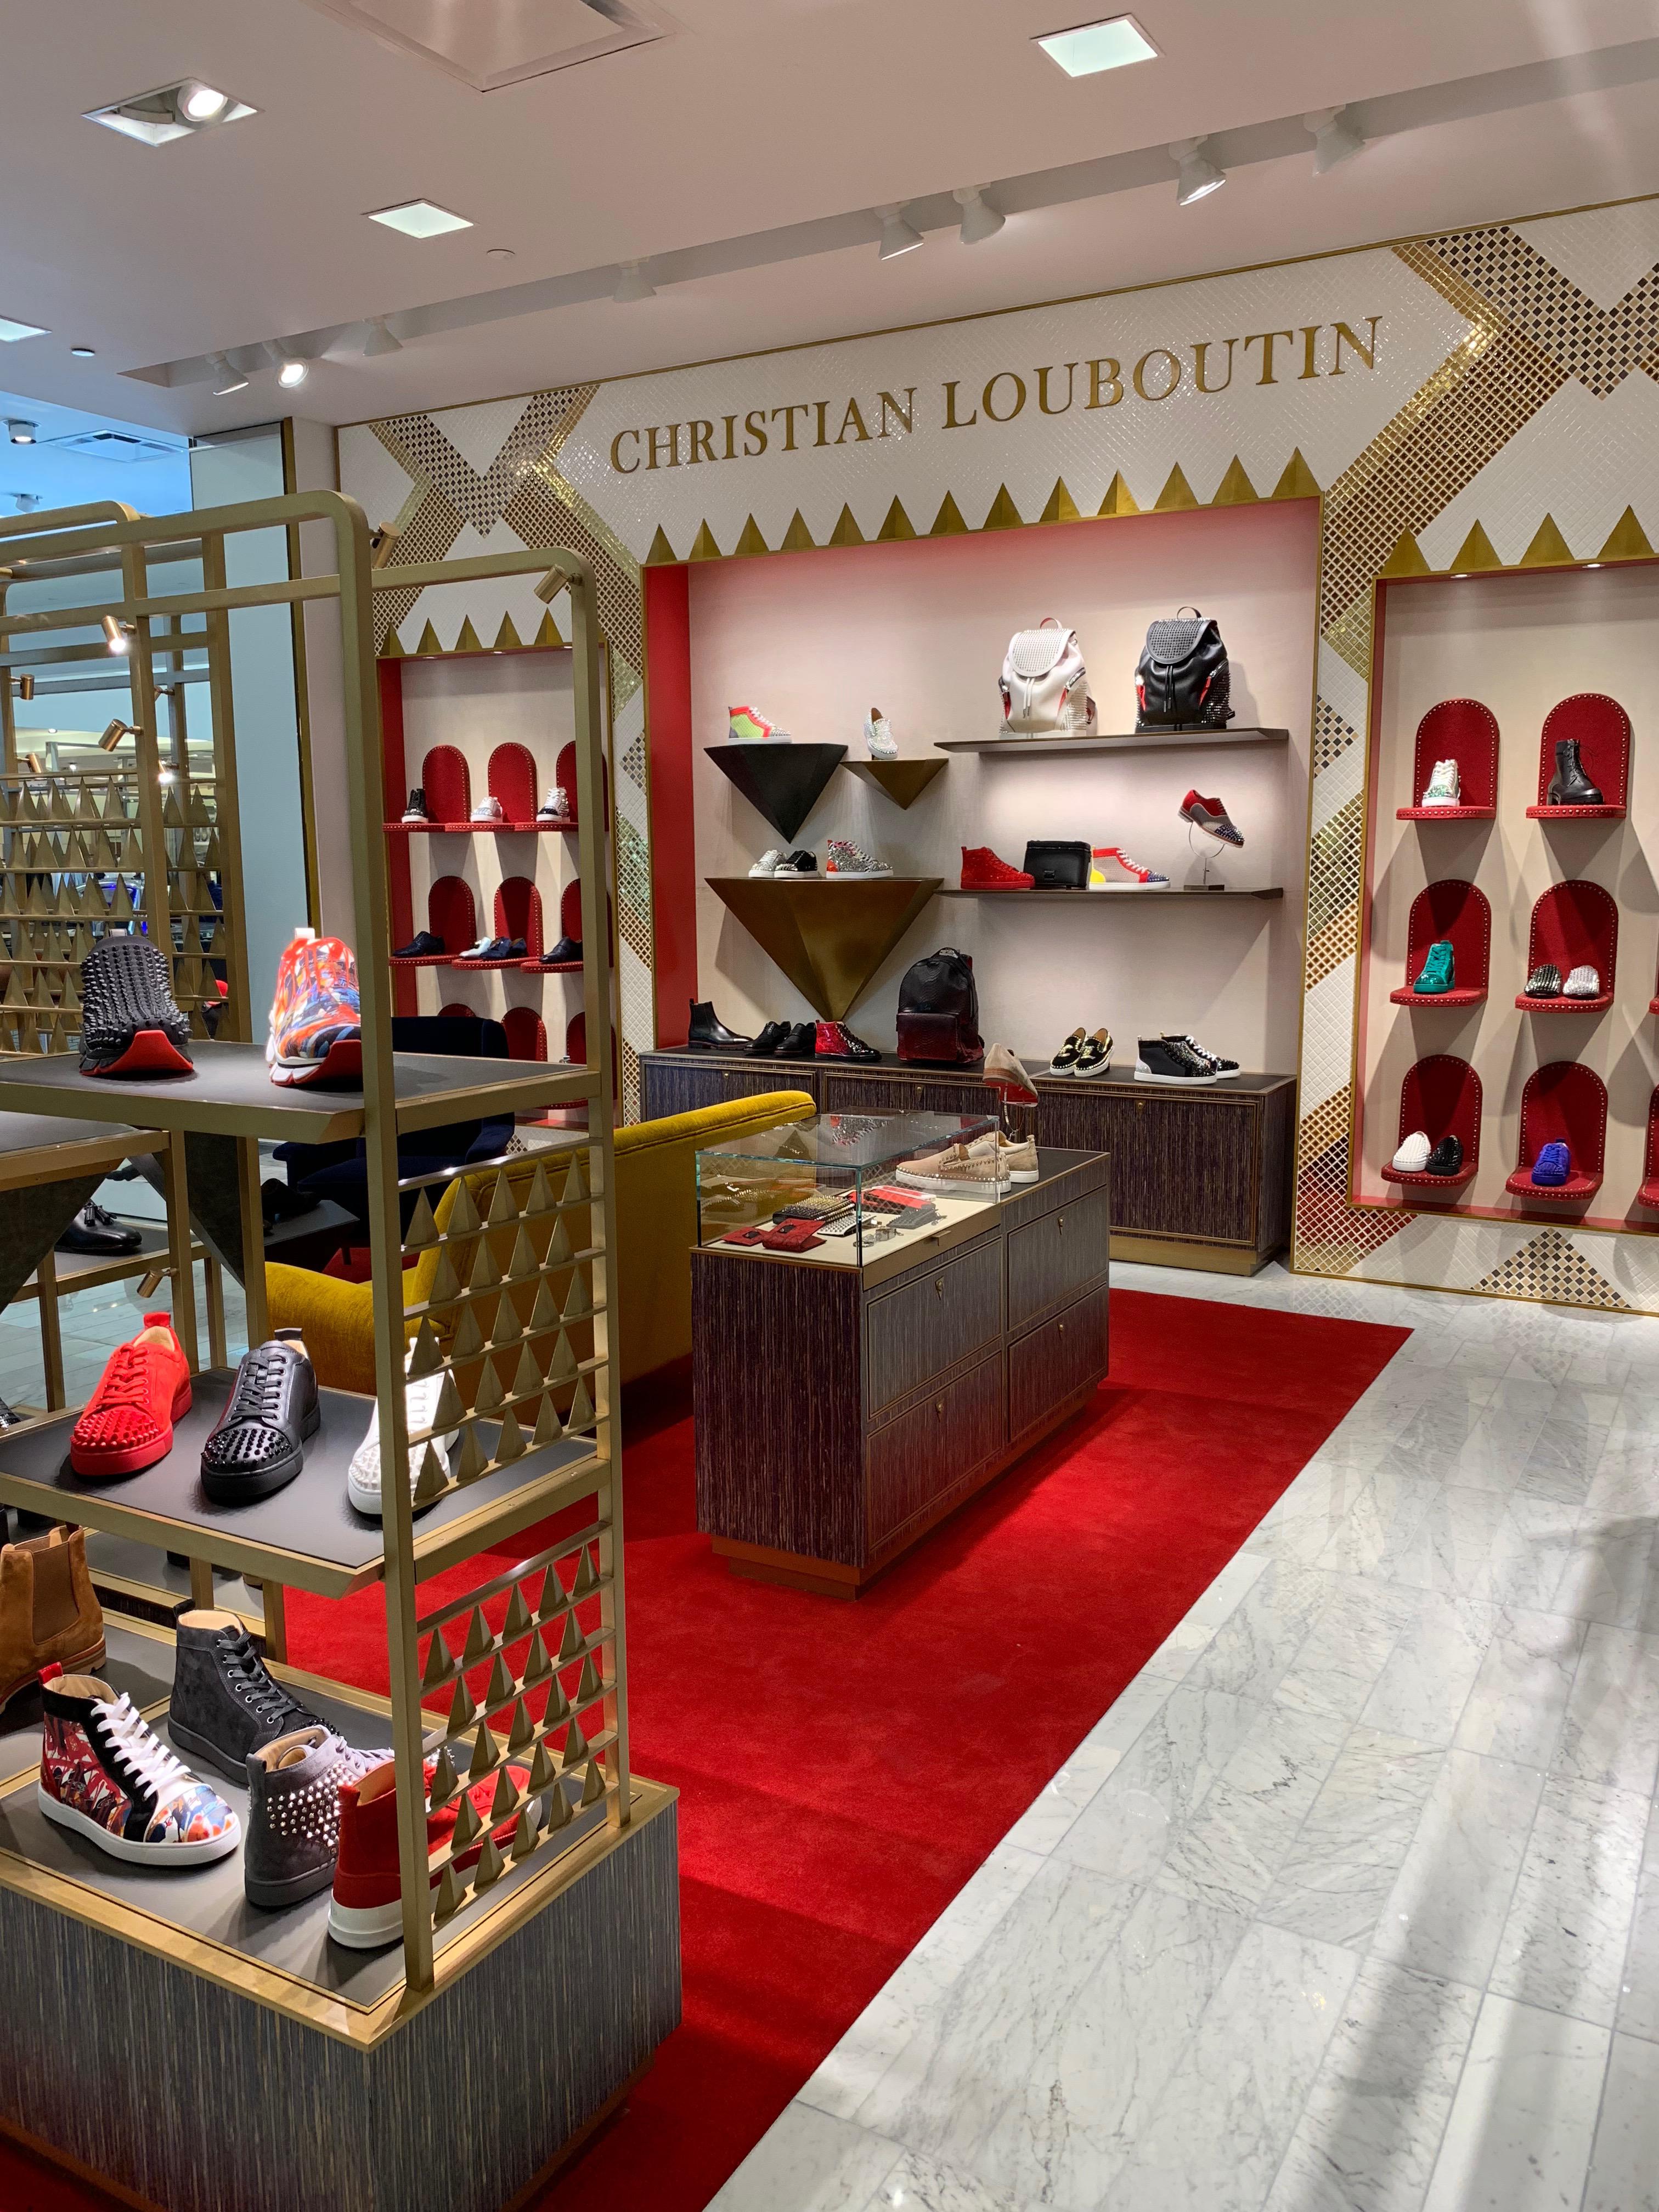 Christian Louboutin Neiman Marcus Beverly Hills 9700 Wilshire Hills, CA, Shoe Stores MapQuest